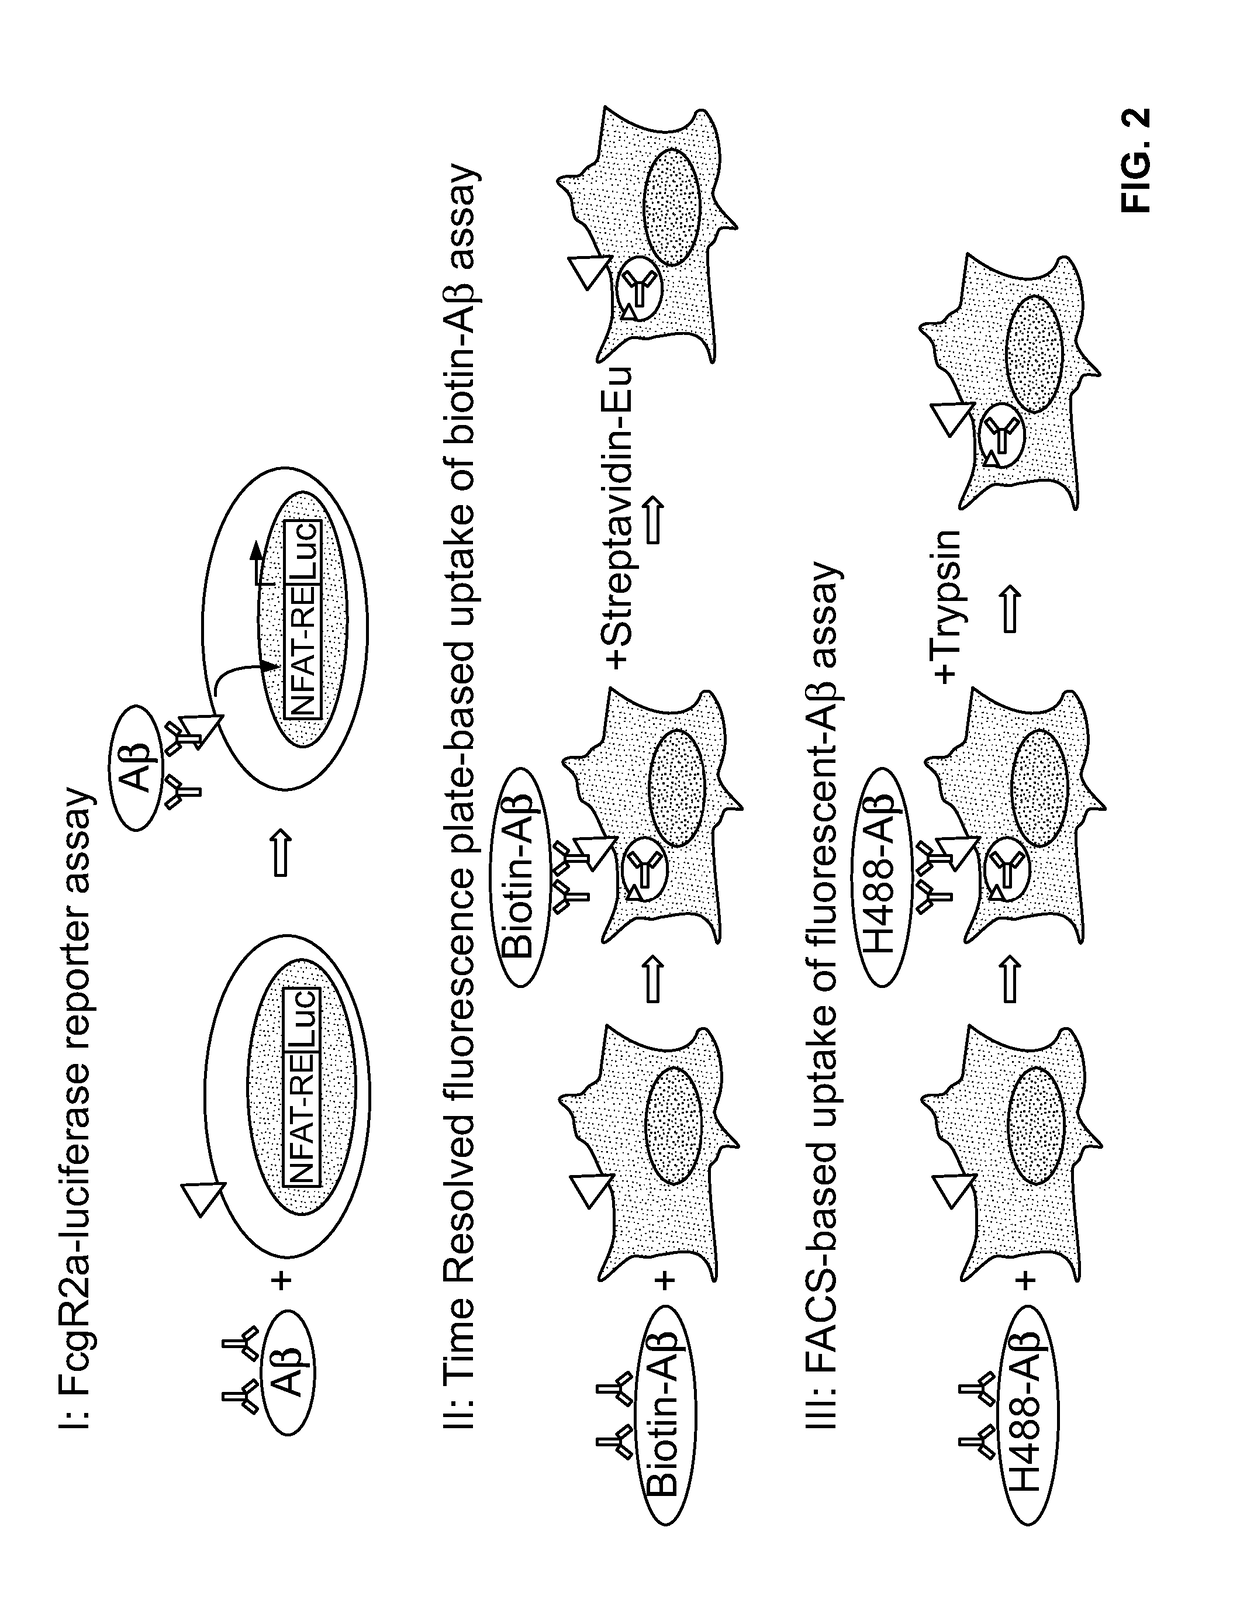 Antibody-dependent cell-mediated phagocytosis assay for reliably measuring uptake of aggregated proteins